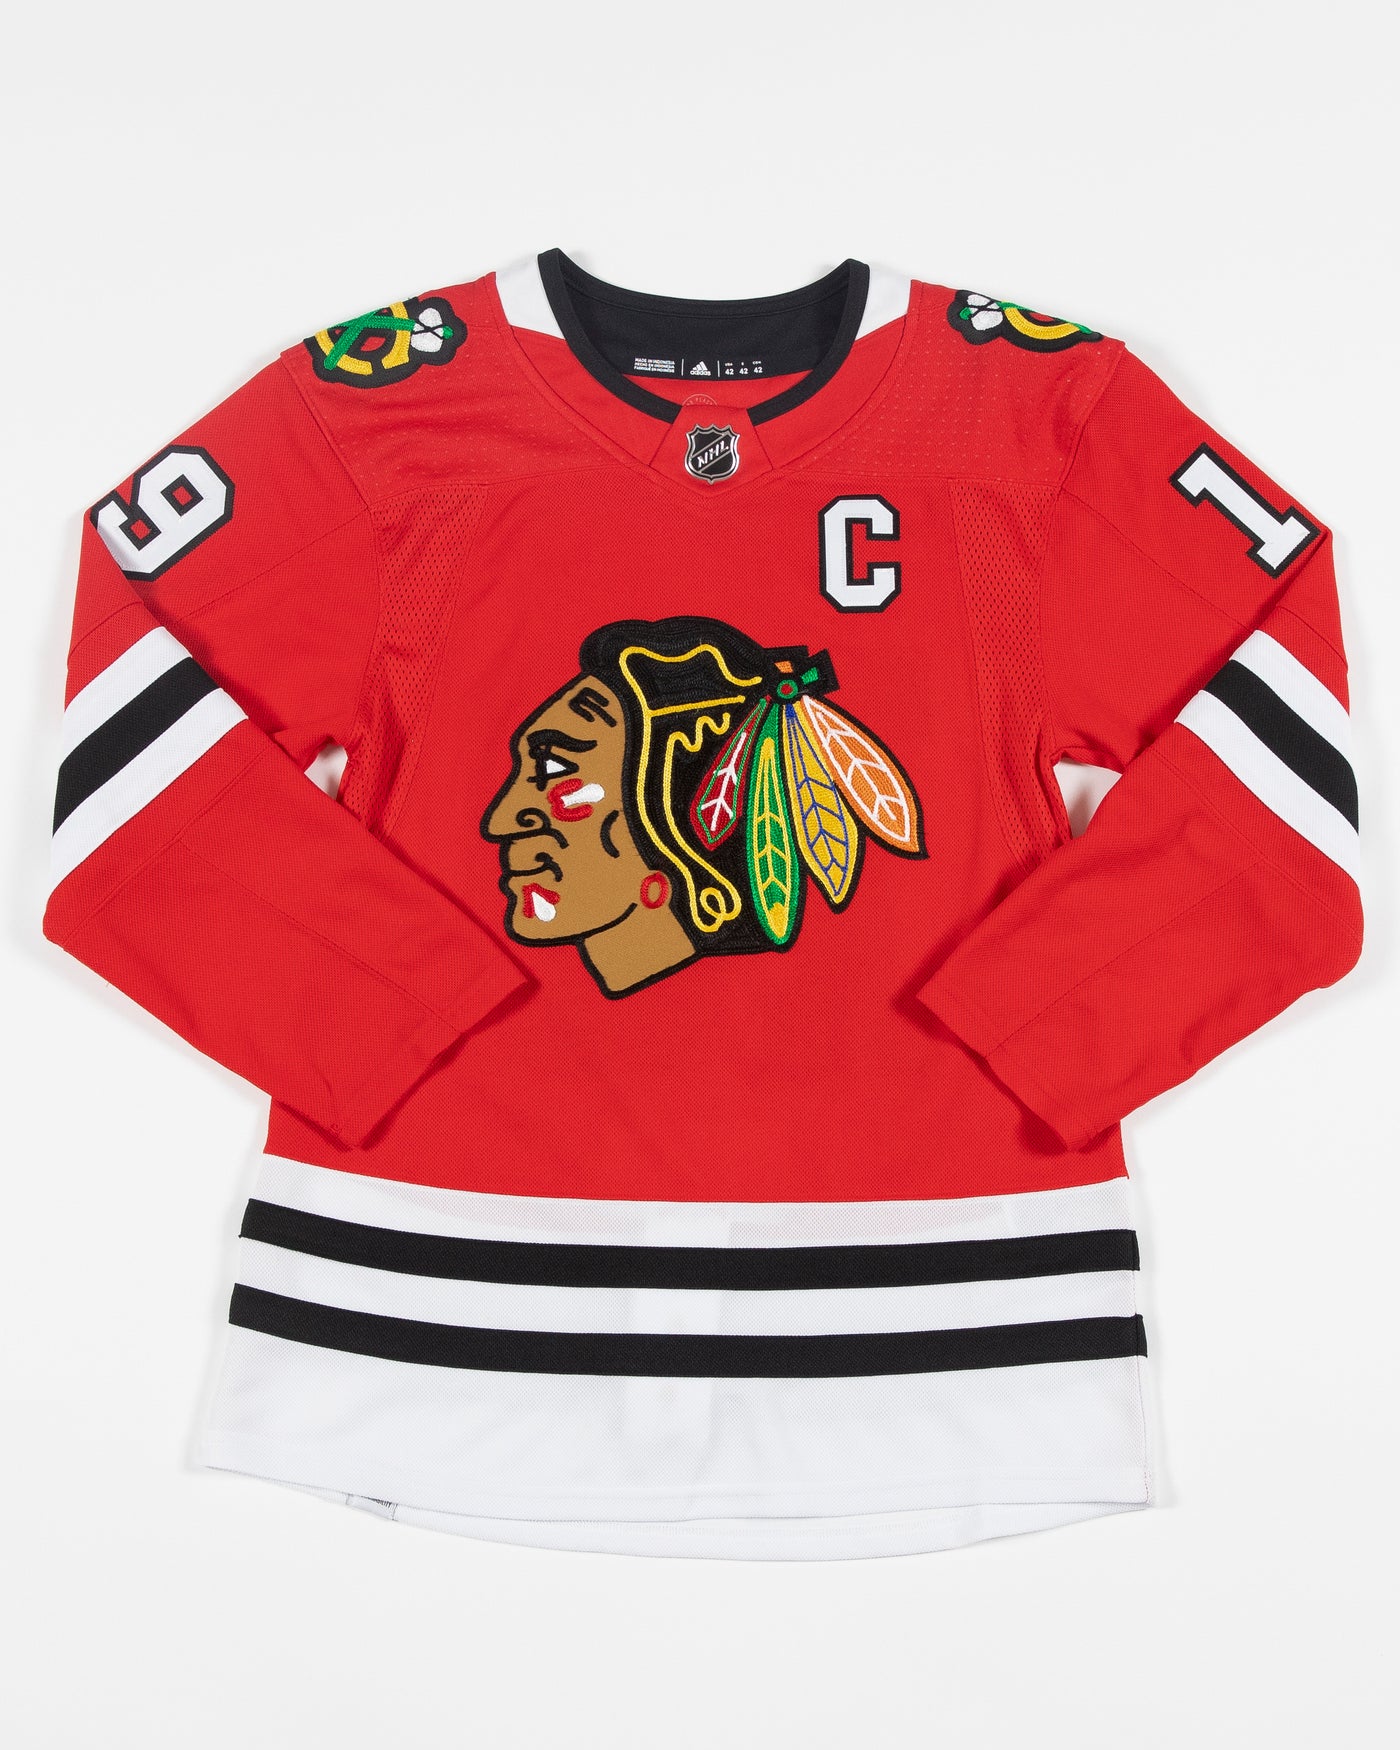 Jonathan Toews Authentic Home Jersey